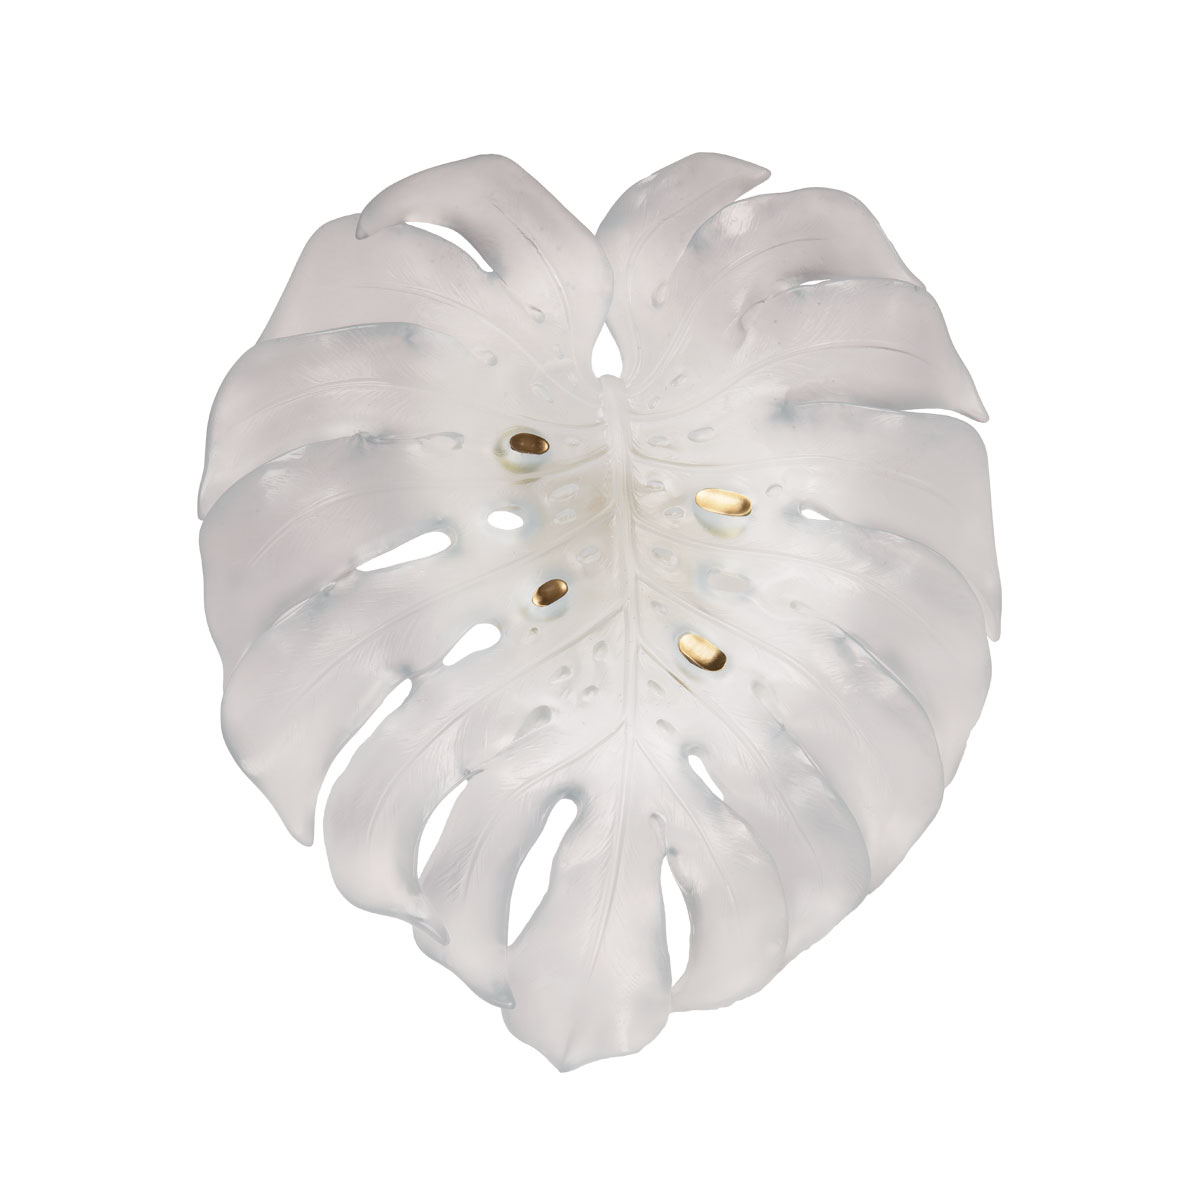 Daum Large Short-Fixture Monstera Wall Lamp in White by Emilio Robba, Sconce